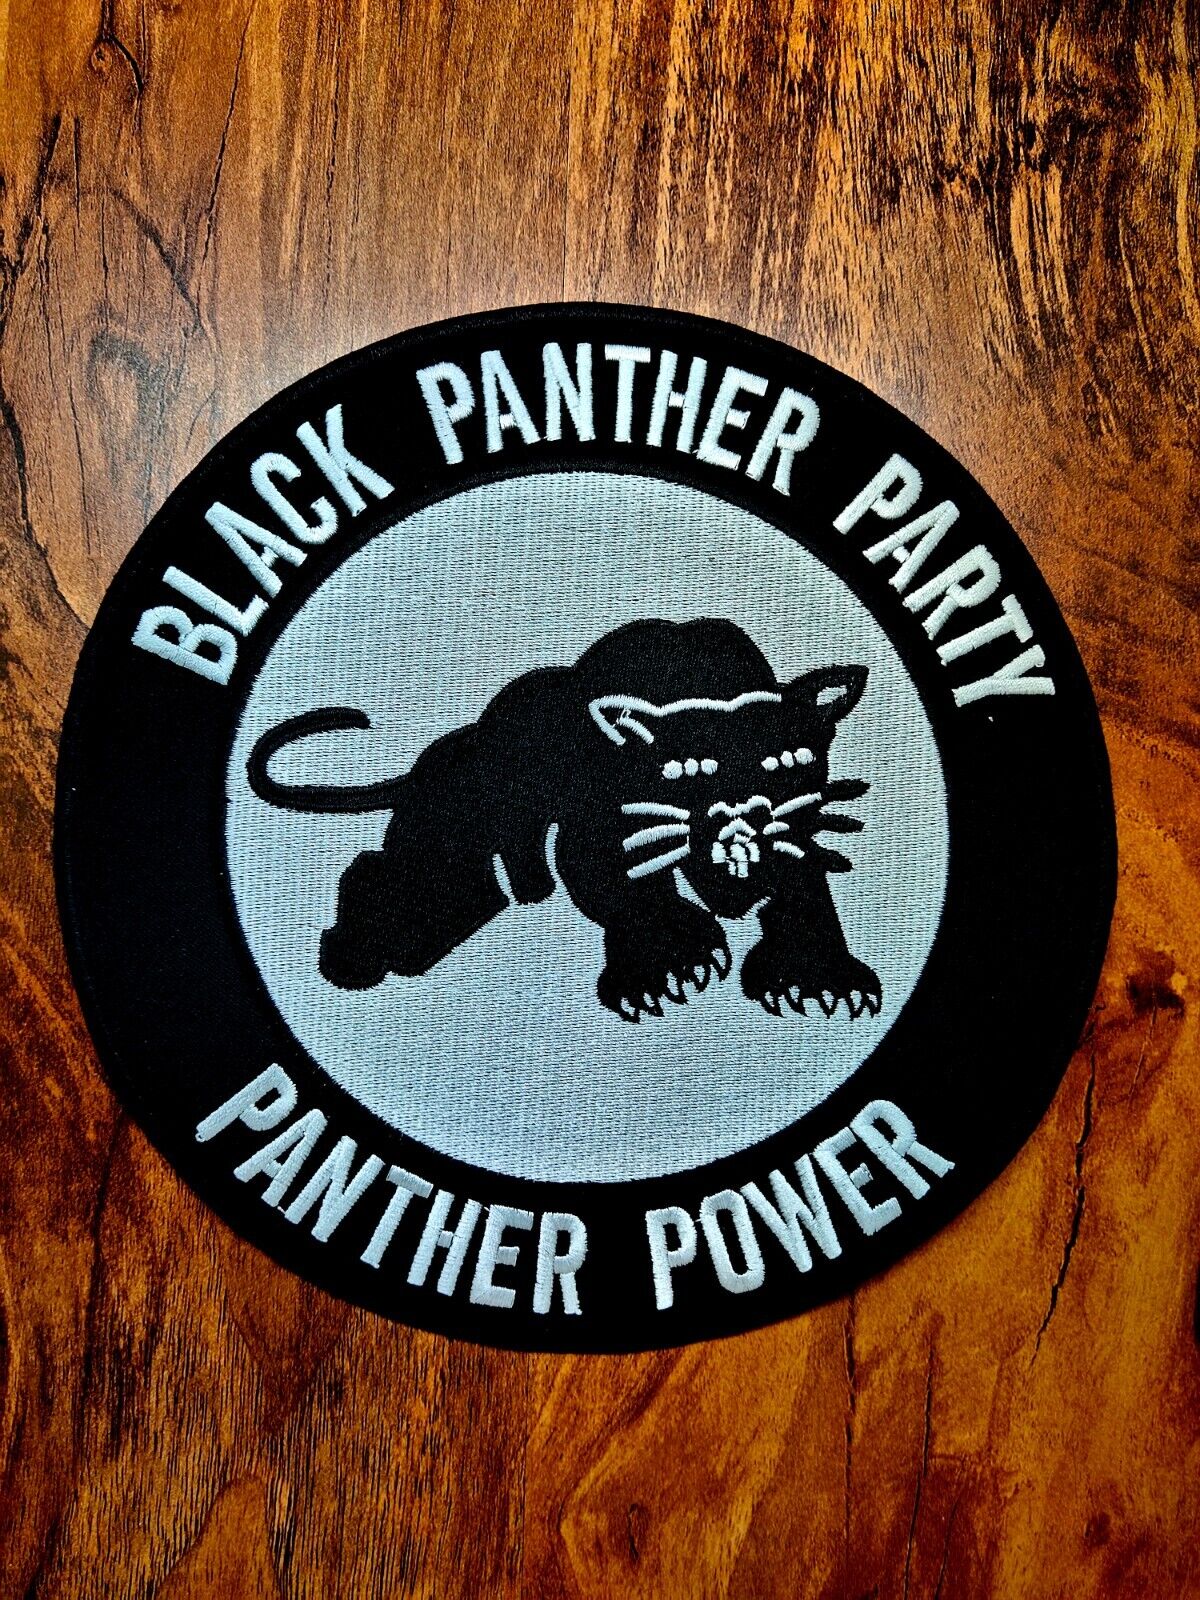 Black Panther Party Panther Power Iron on Embroidered Large Back Patch Badge